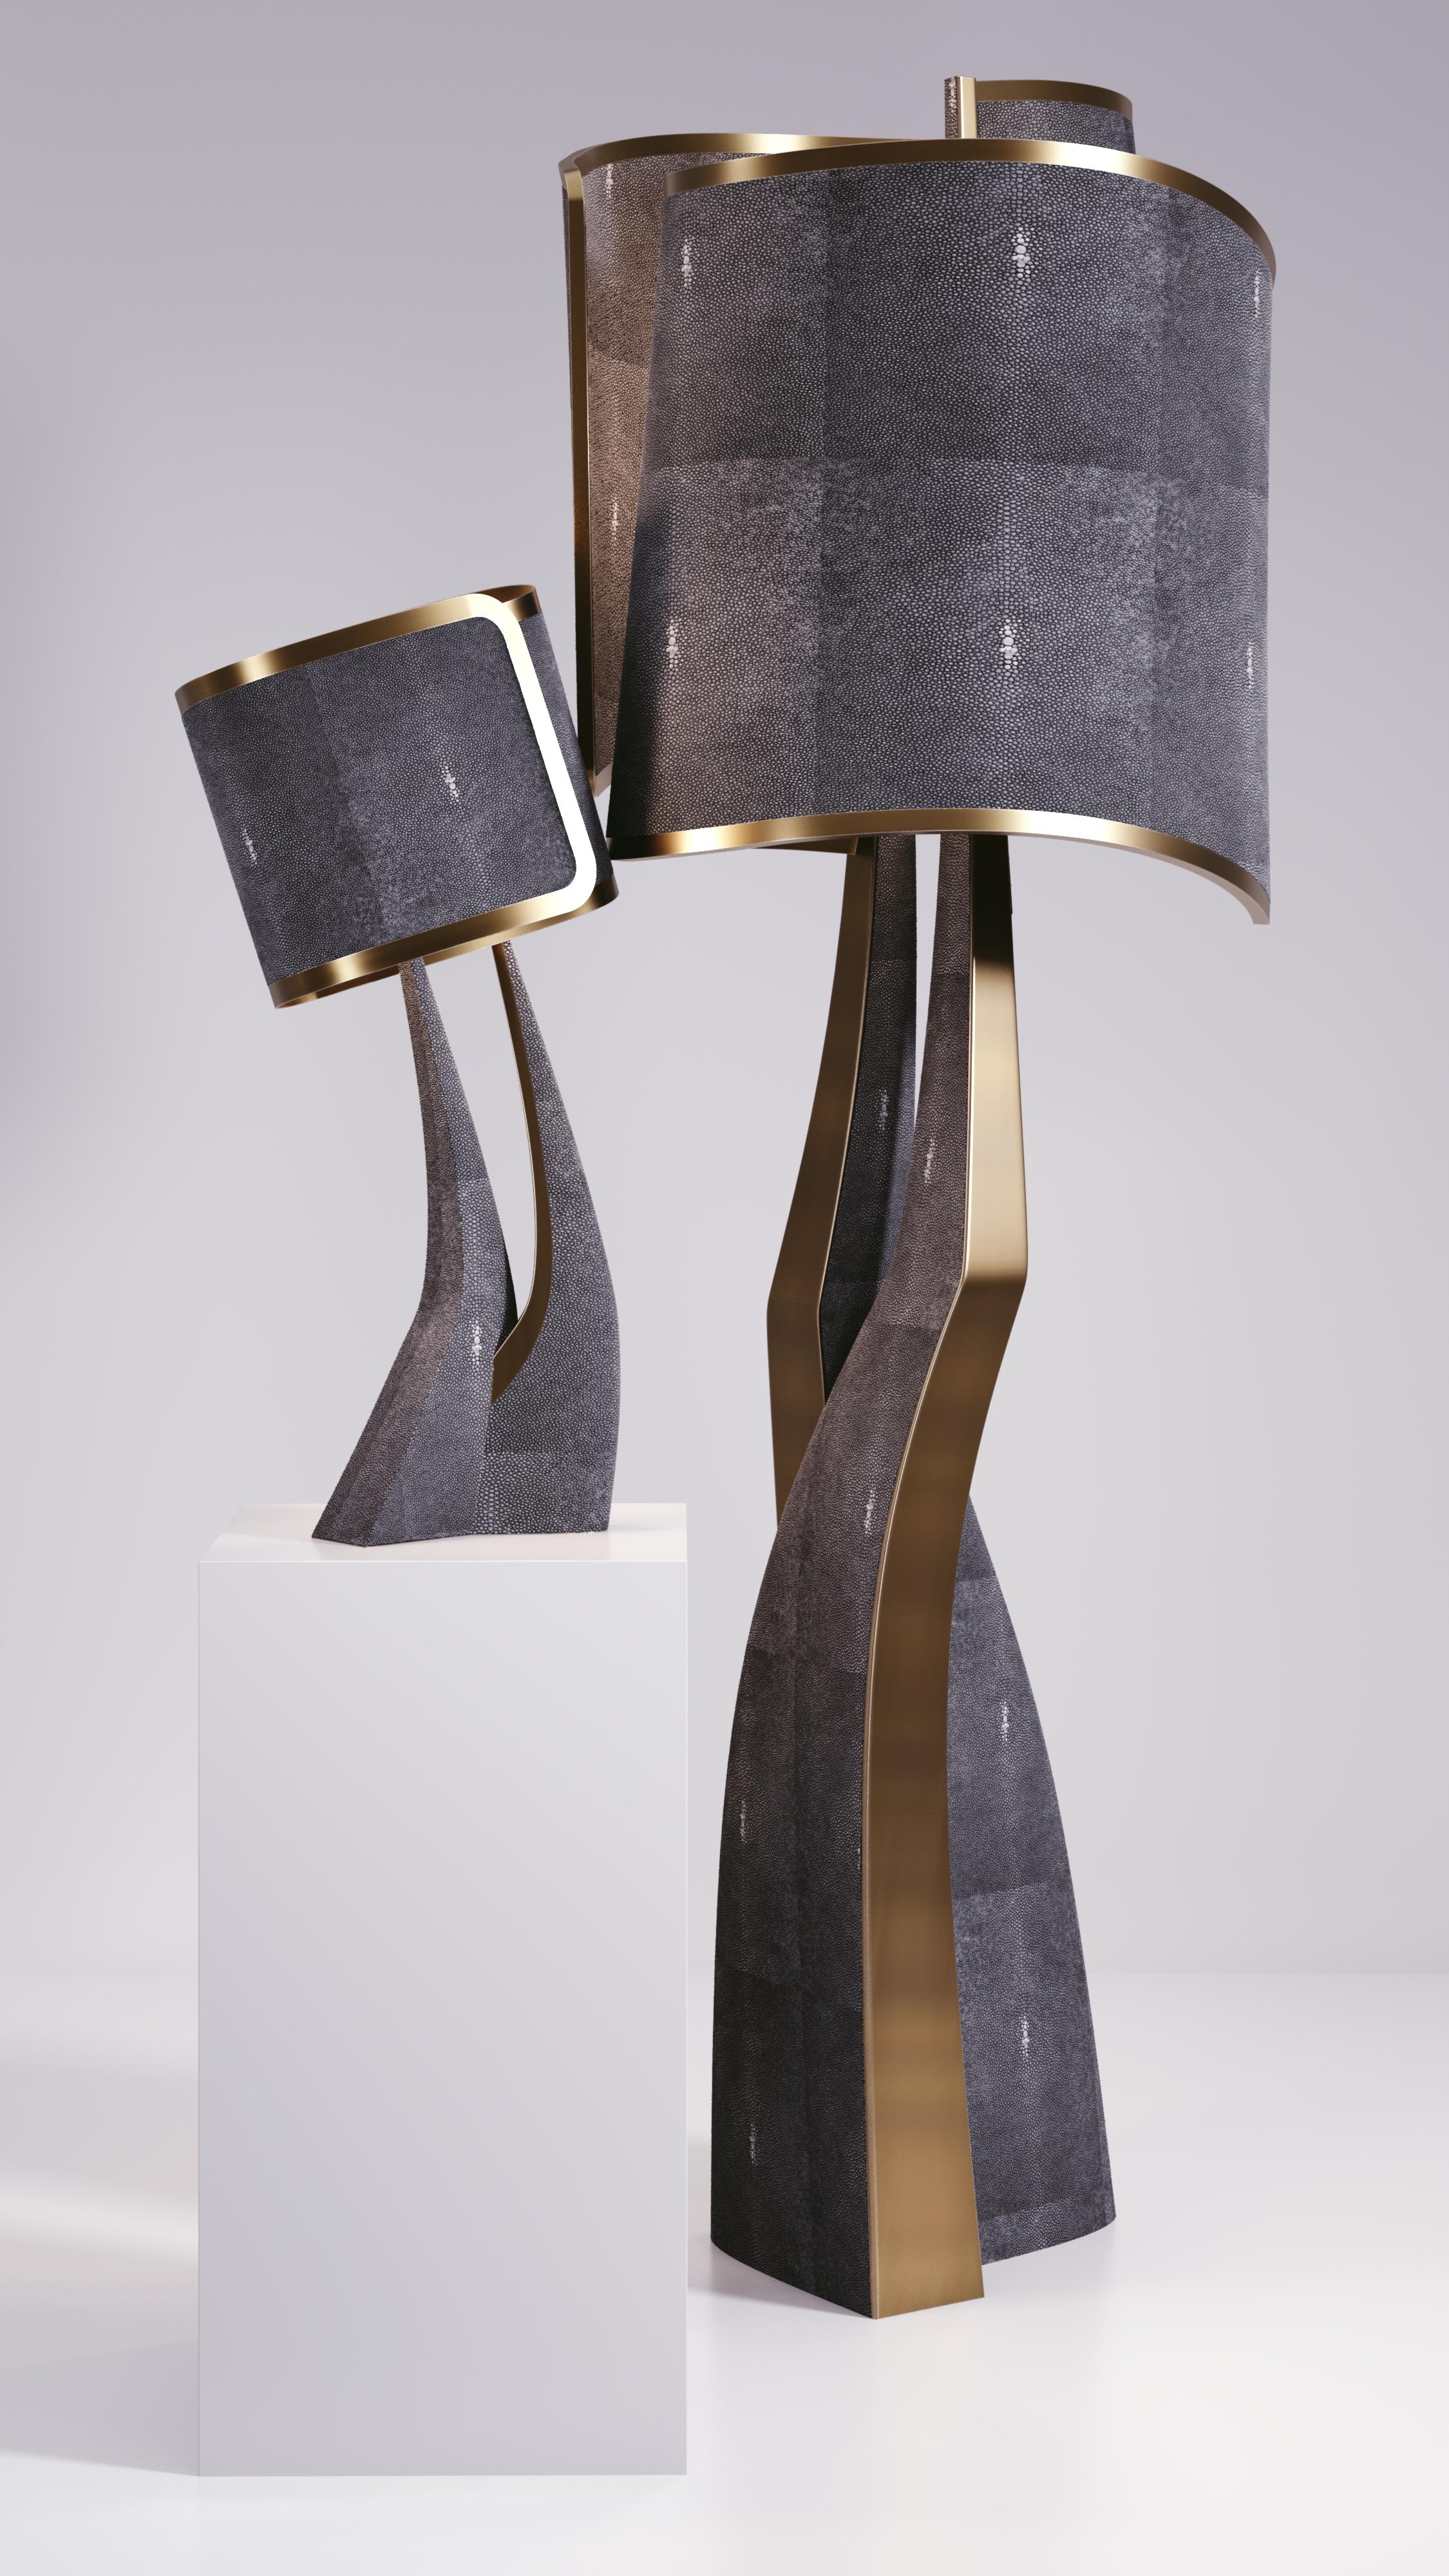 The Chital III Floor Lamp by Kifu Paris is a sleek and sculptural piece, inlaid in a mixture of bronze-patina brass and col black shagreen. The chiseled legs, which are an iconic shape within the KIFU PARIS universe, morph into the solid shades that